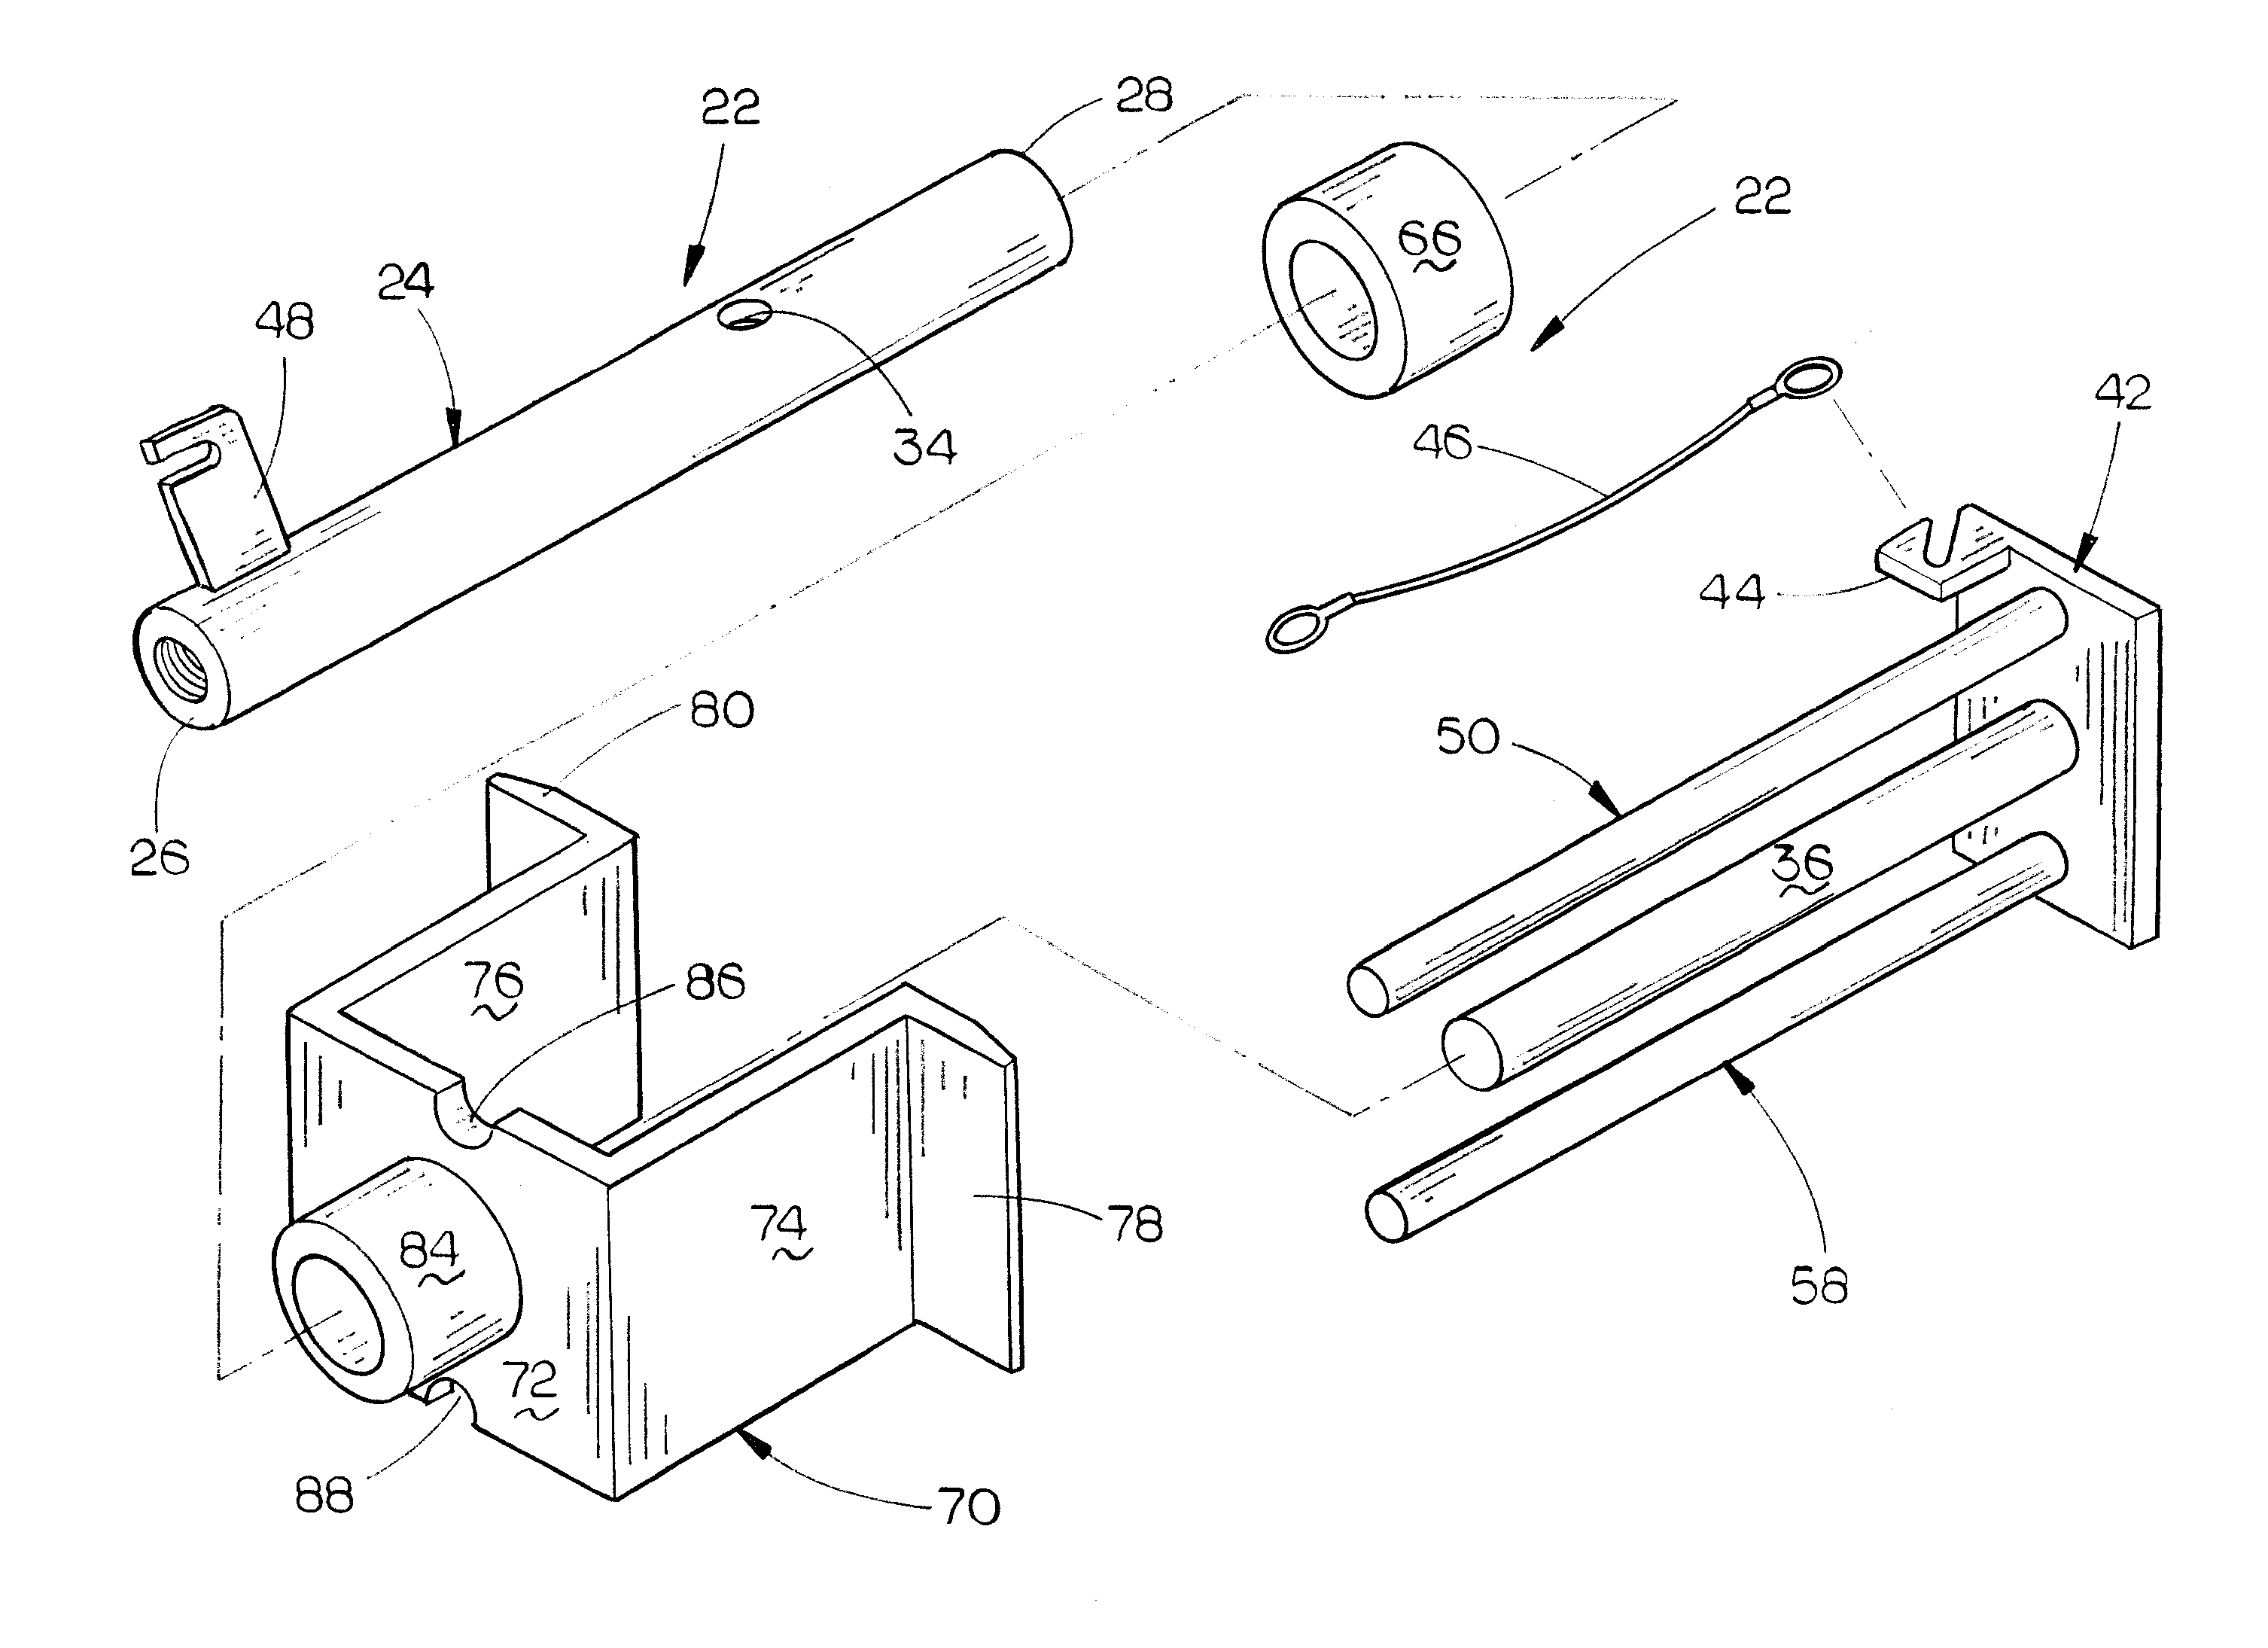 Forcible entry device